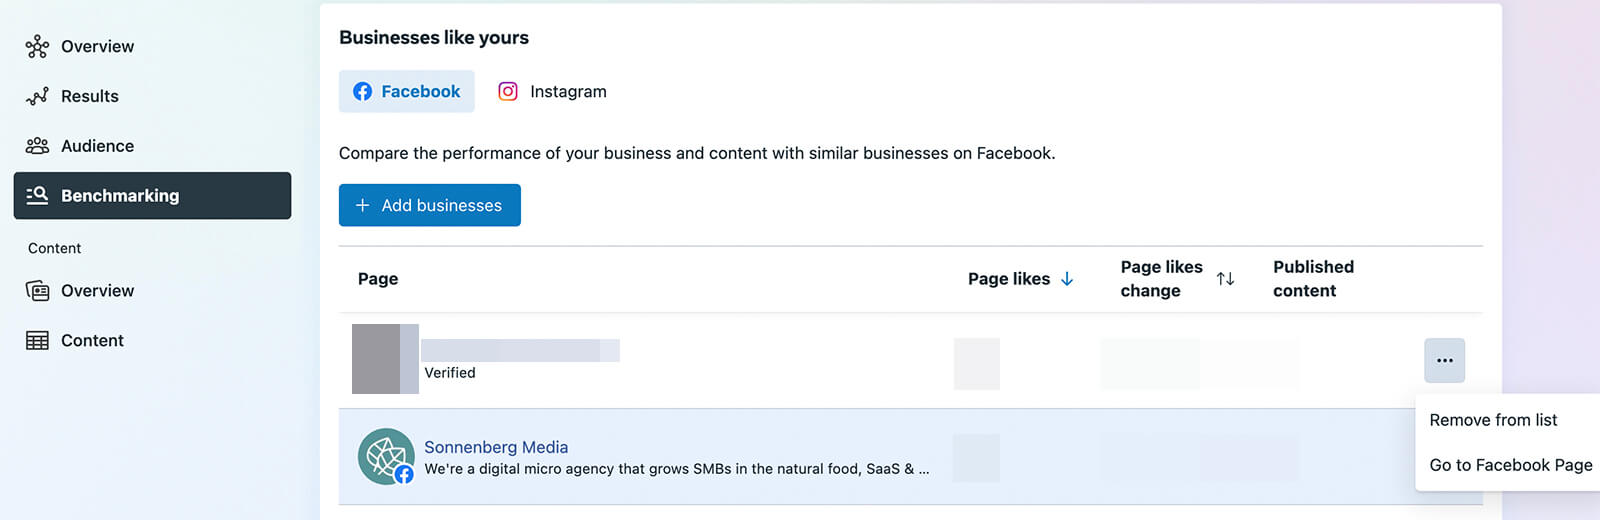 how-to-find-competitors-organic-audiences-on-facebook-business-suite-benchmarking-tab-sonnenbergmedia-sonnenberg-media-example-1